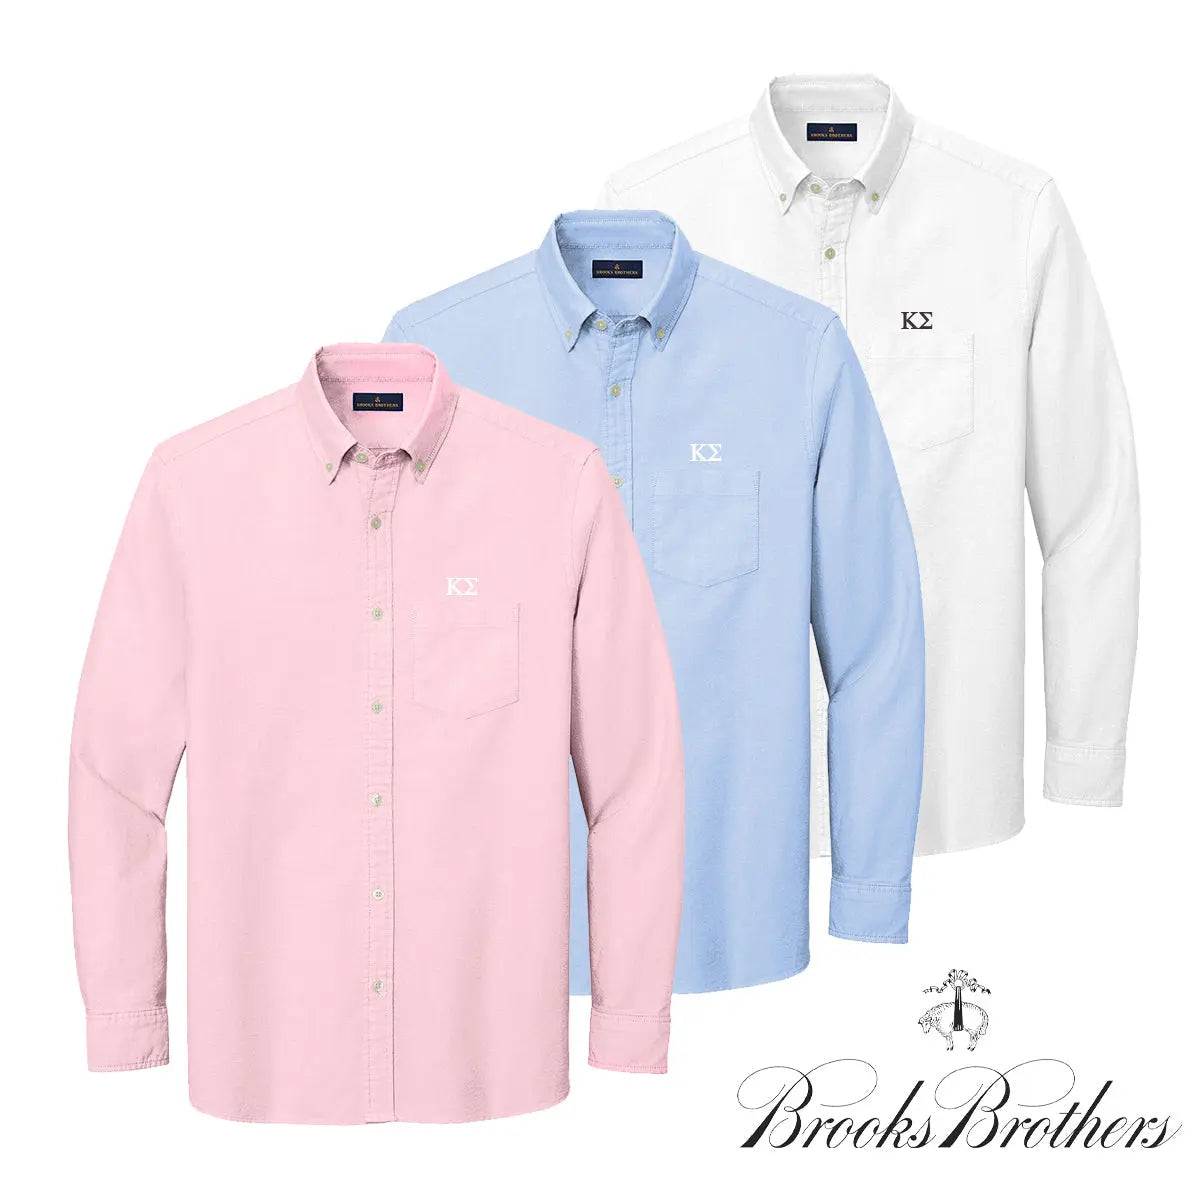 Kappa Sig Brooks Brothers Oxford Button Up Shirt - Kappa Sigma Official Store